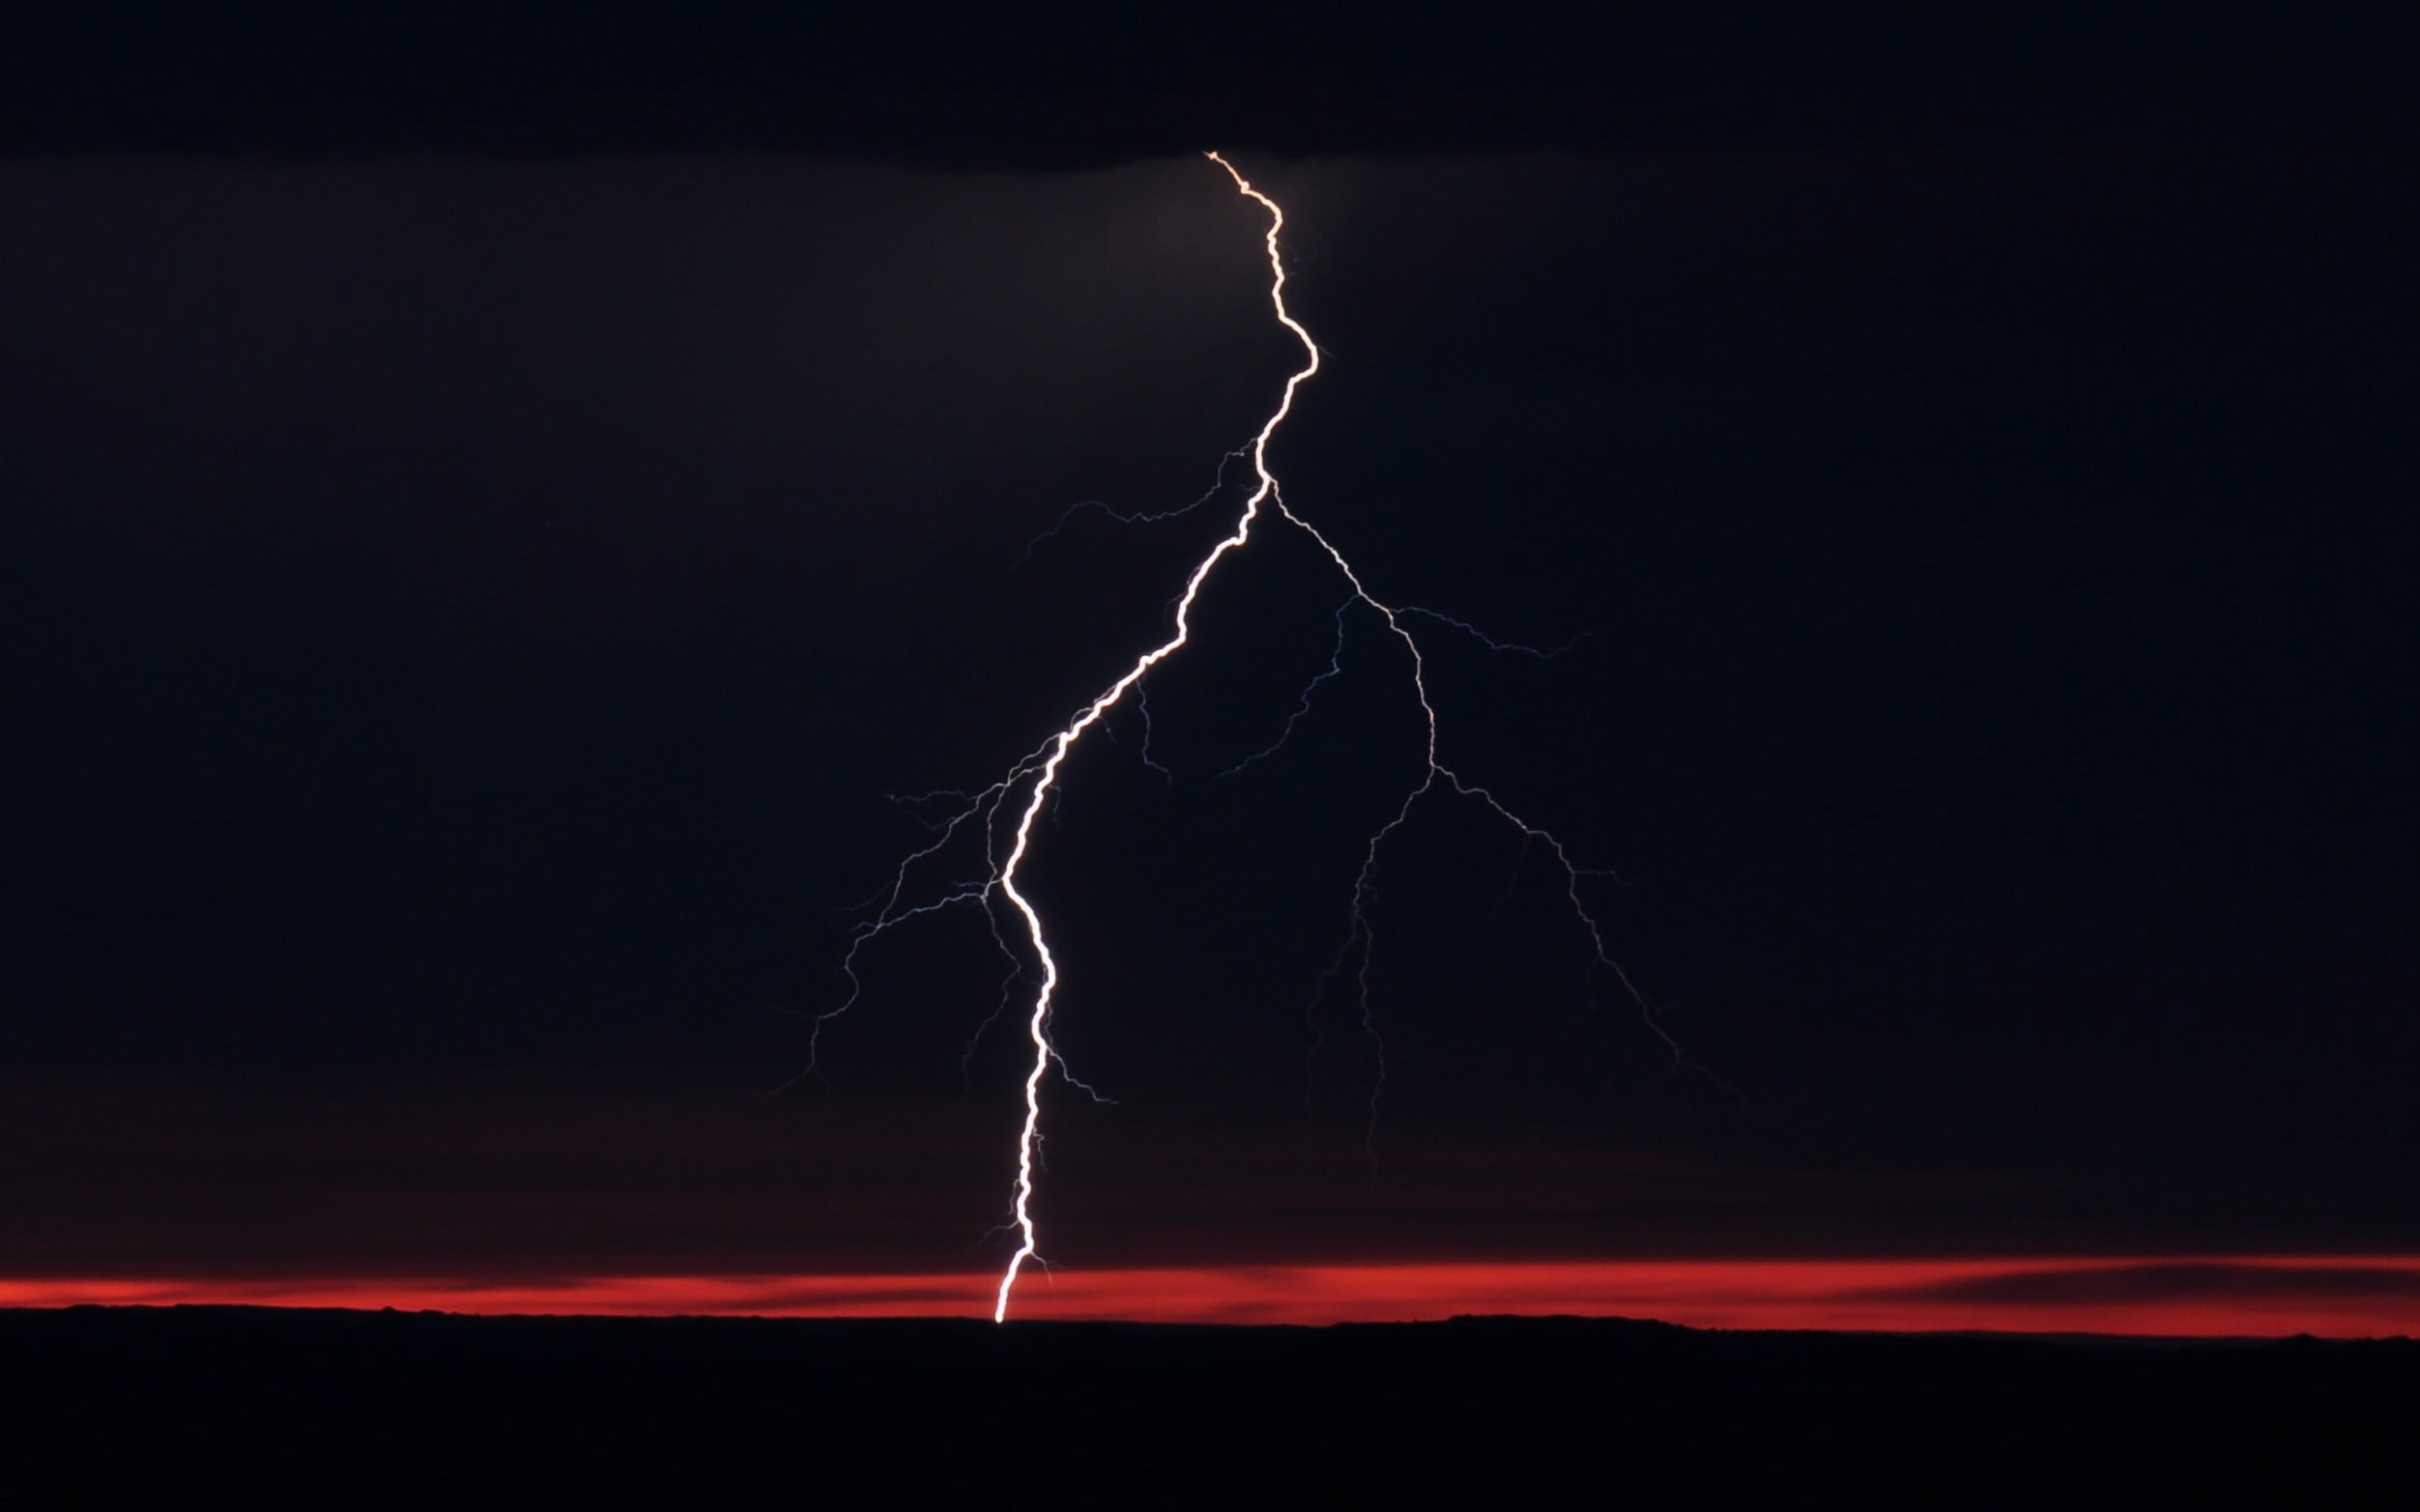 thunder during golden hour photo, photography, landscape, nature